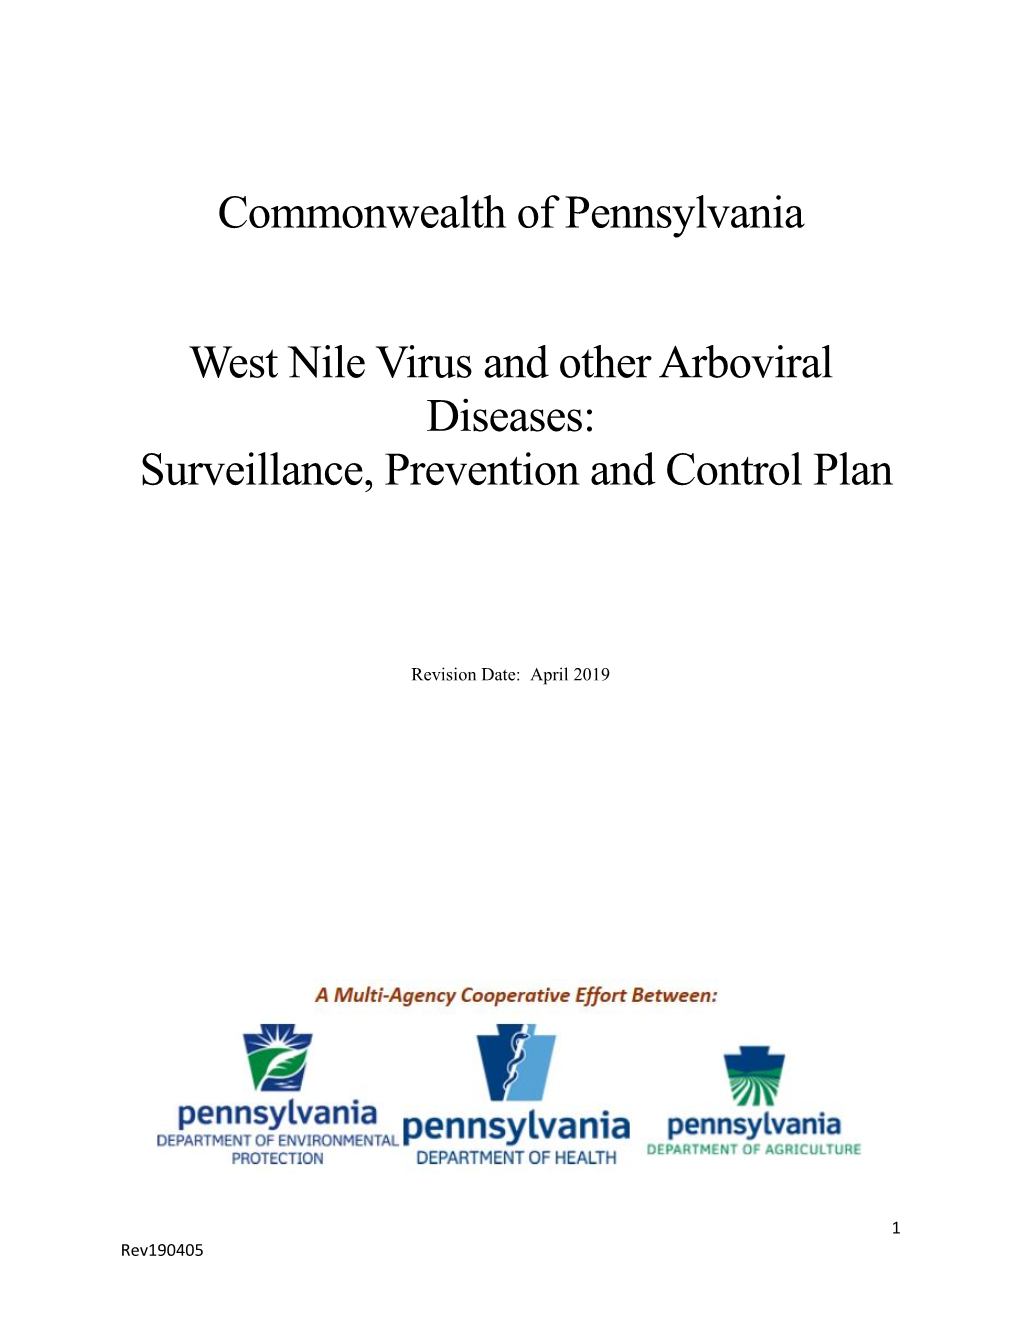 West Nile Virus and Other Arboviral Diseases: Surveillance, Prevention and Control Plan